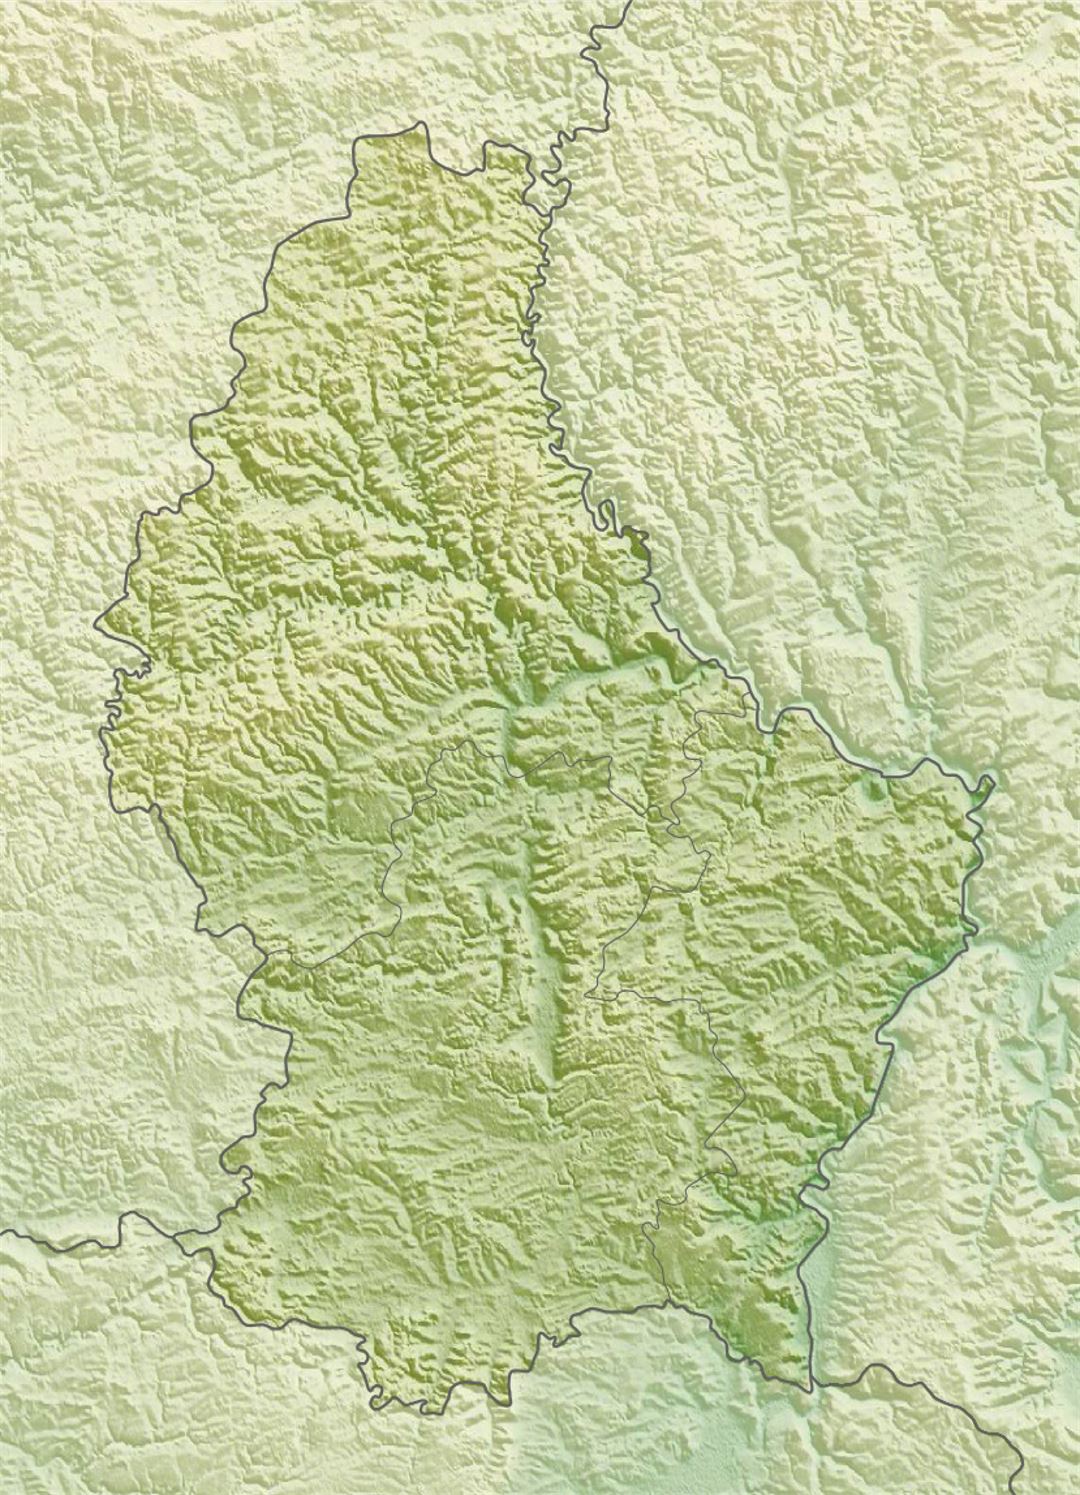 Detailed relief map of Luxembourg